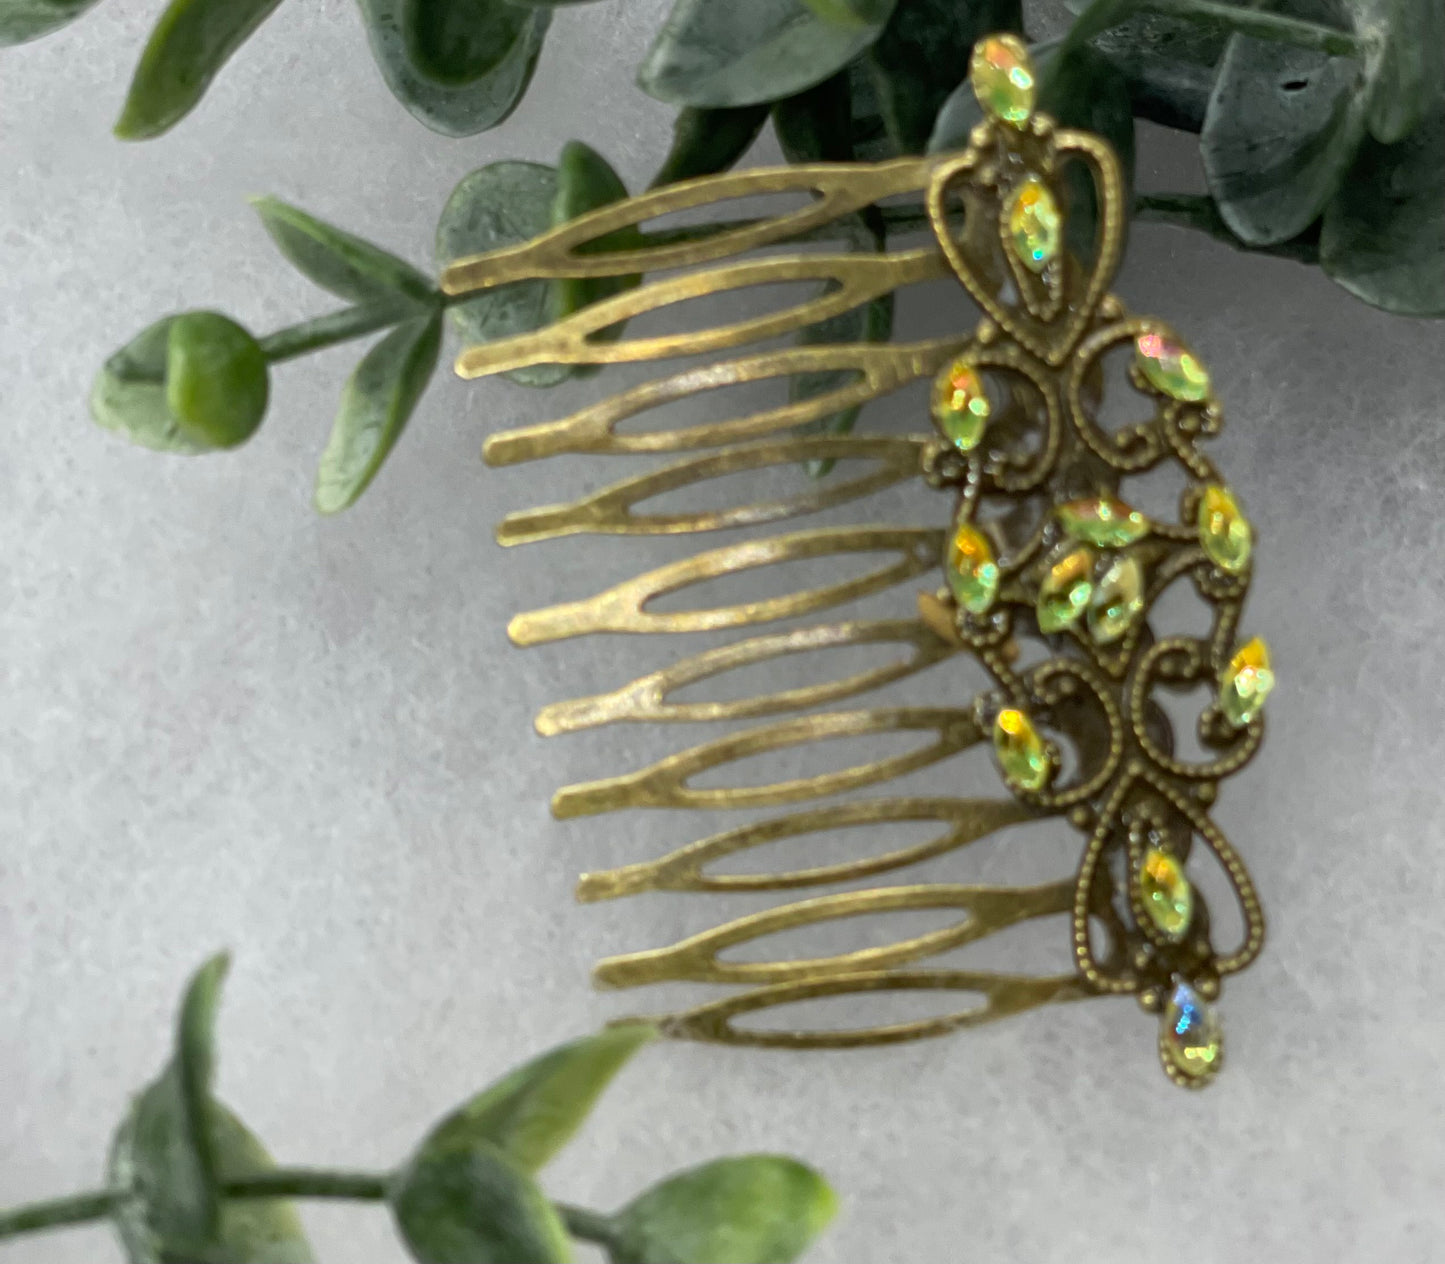 Yellow iridescent crystal vintage style antique hair accessories gift birthday event formal bridesmaid  2.5” Metal side Comb #253